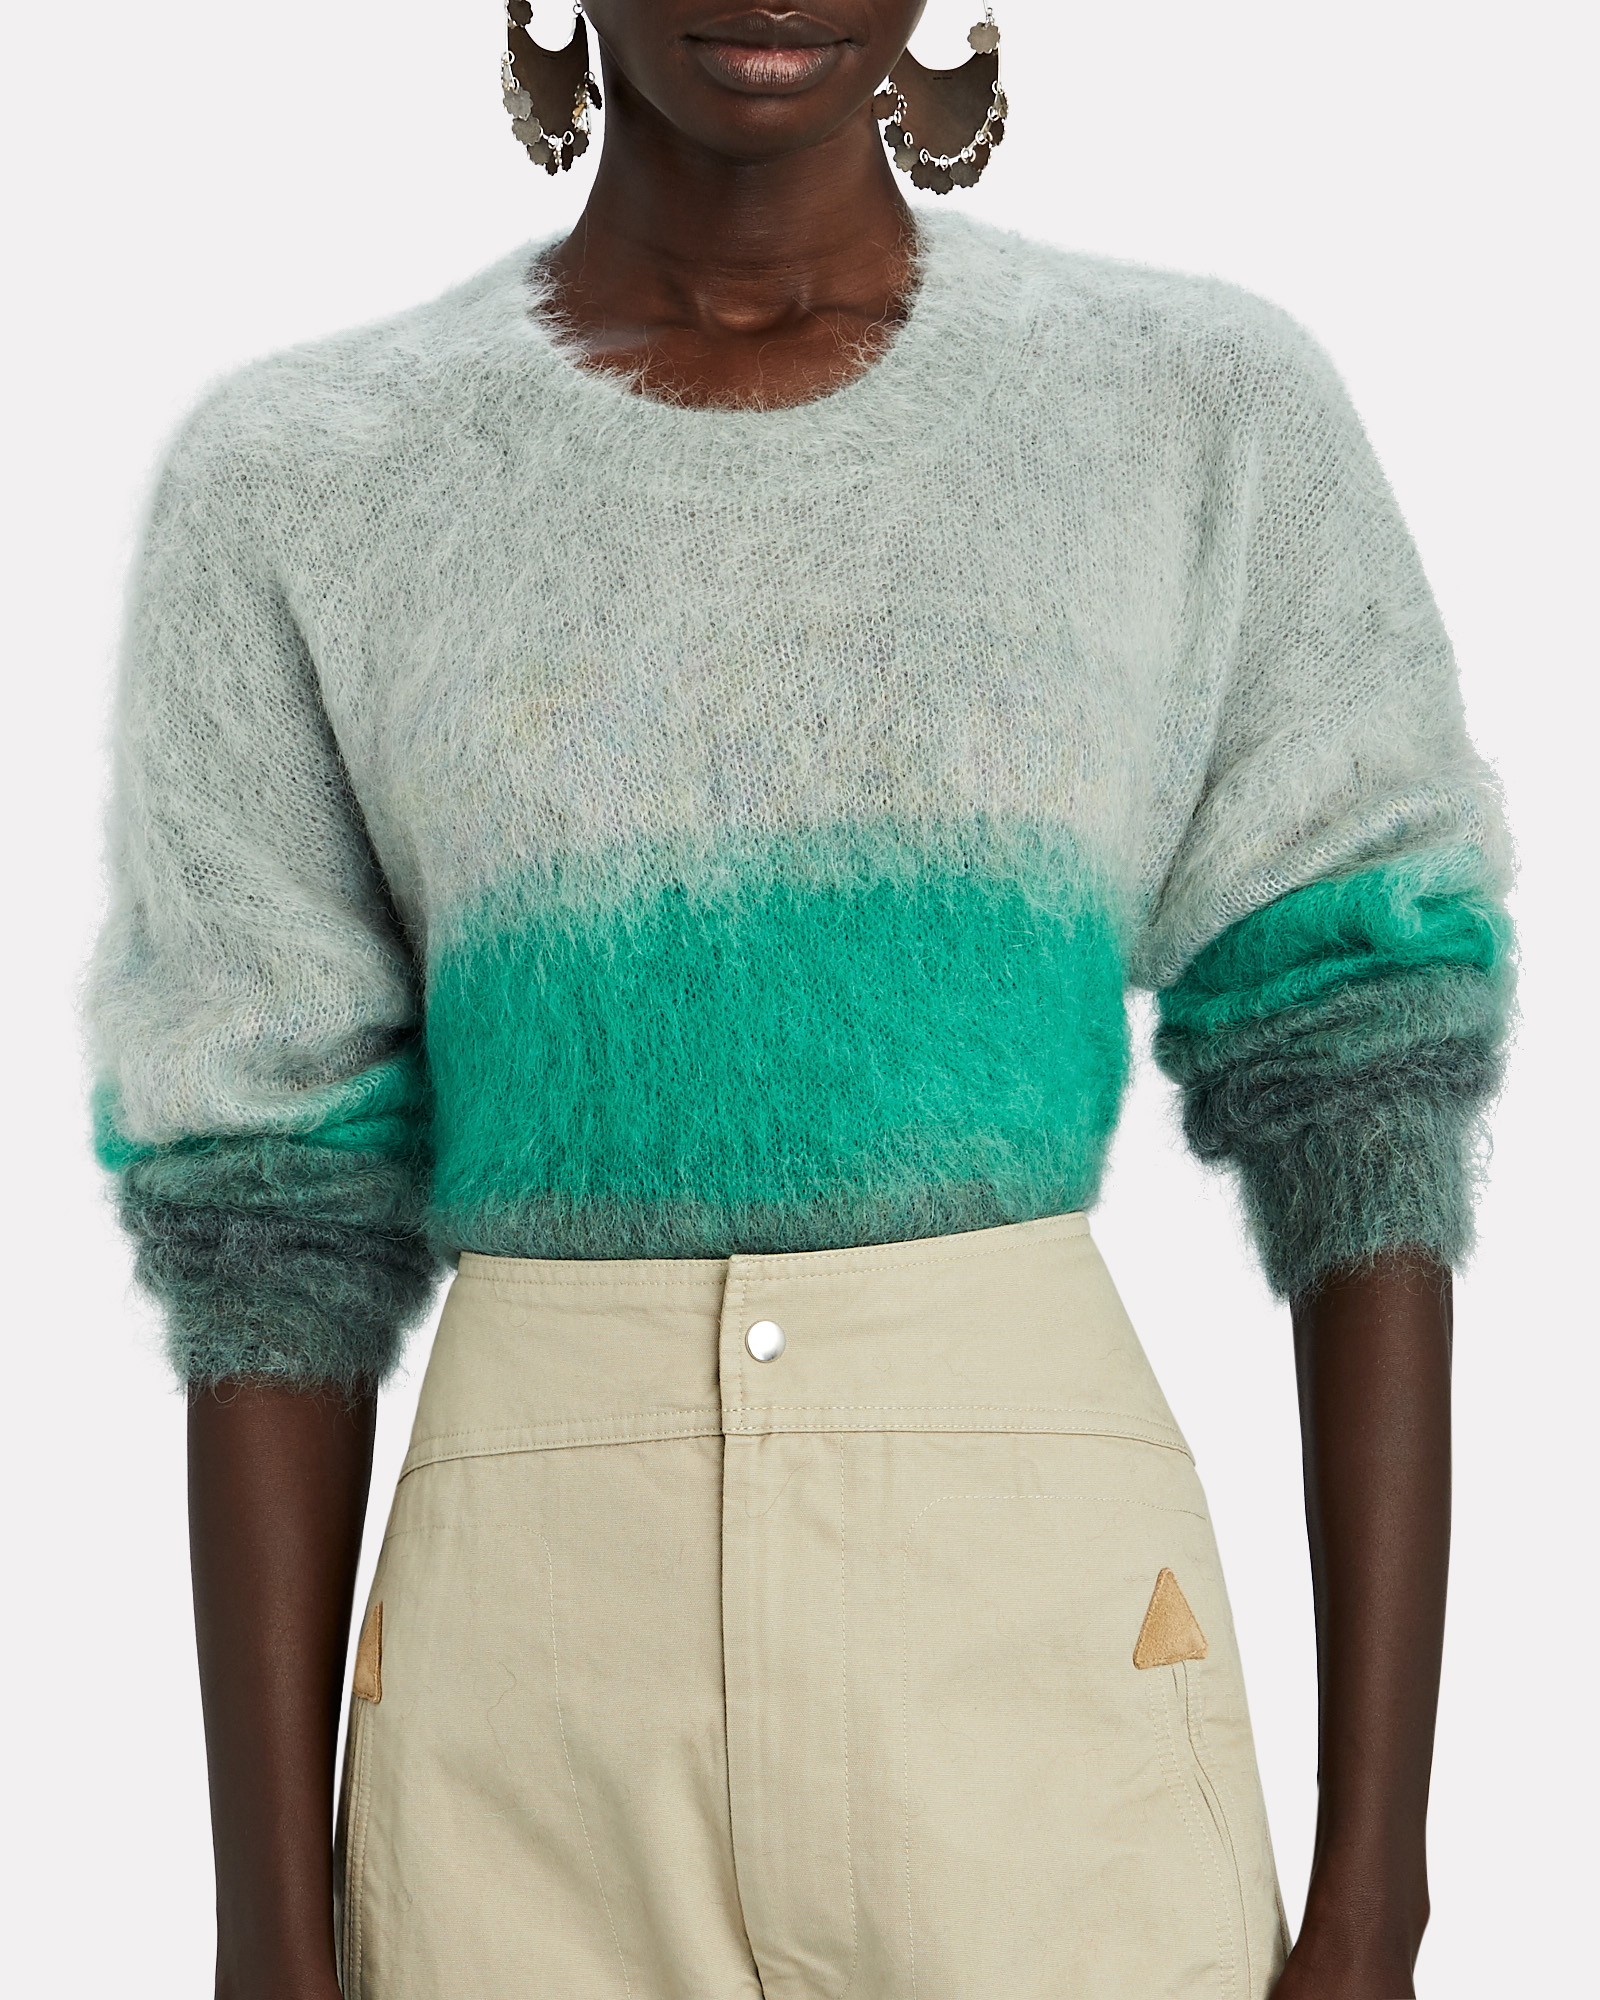 Isabel Marant Étoile Drussell Striped Mohair Sweater | INTERMIX®